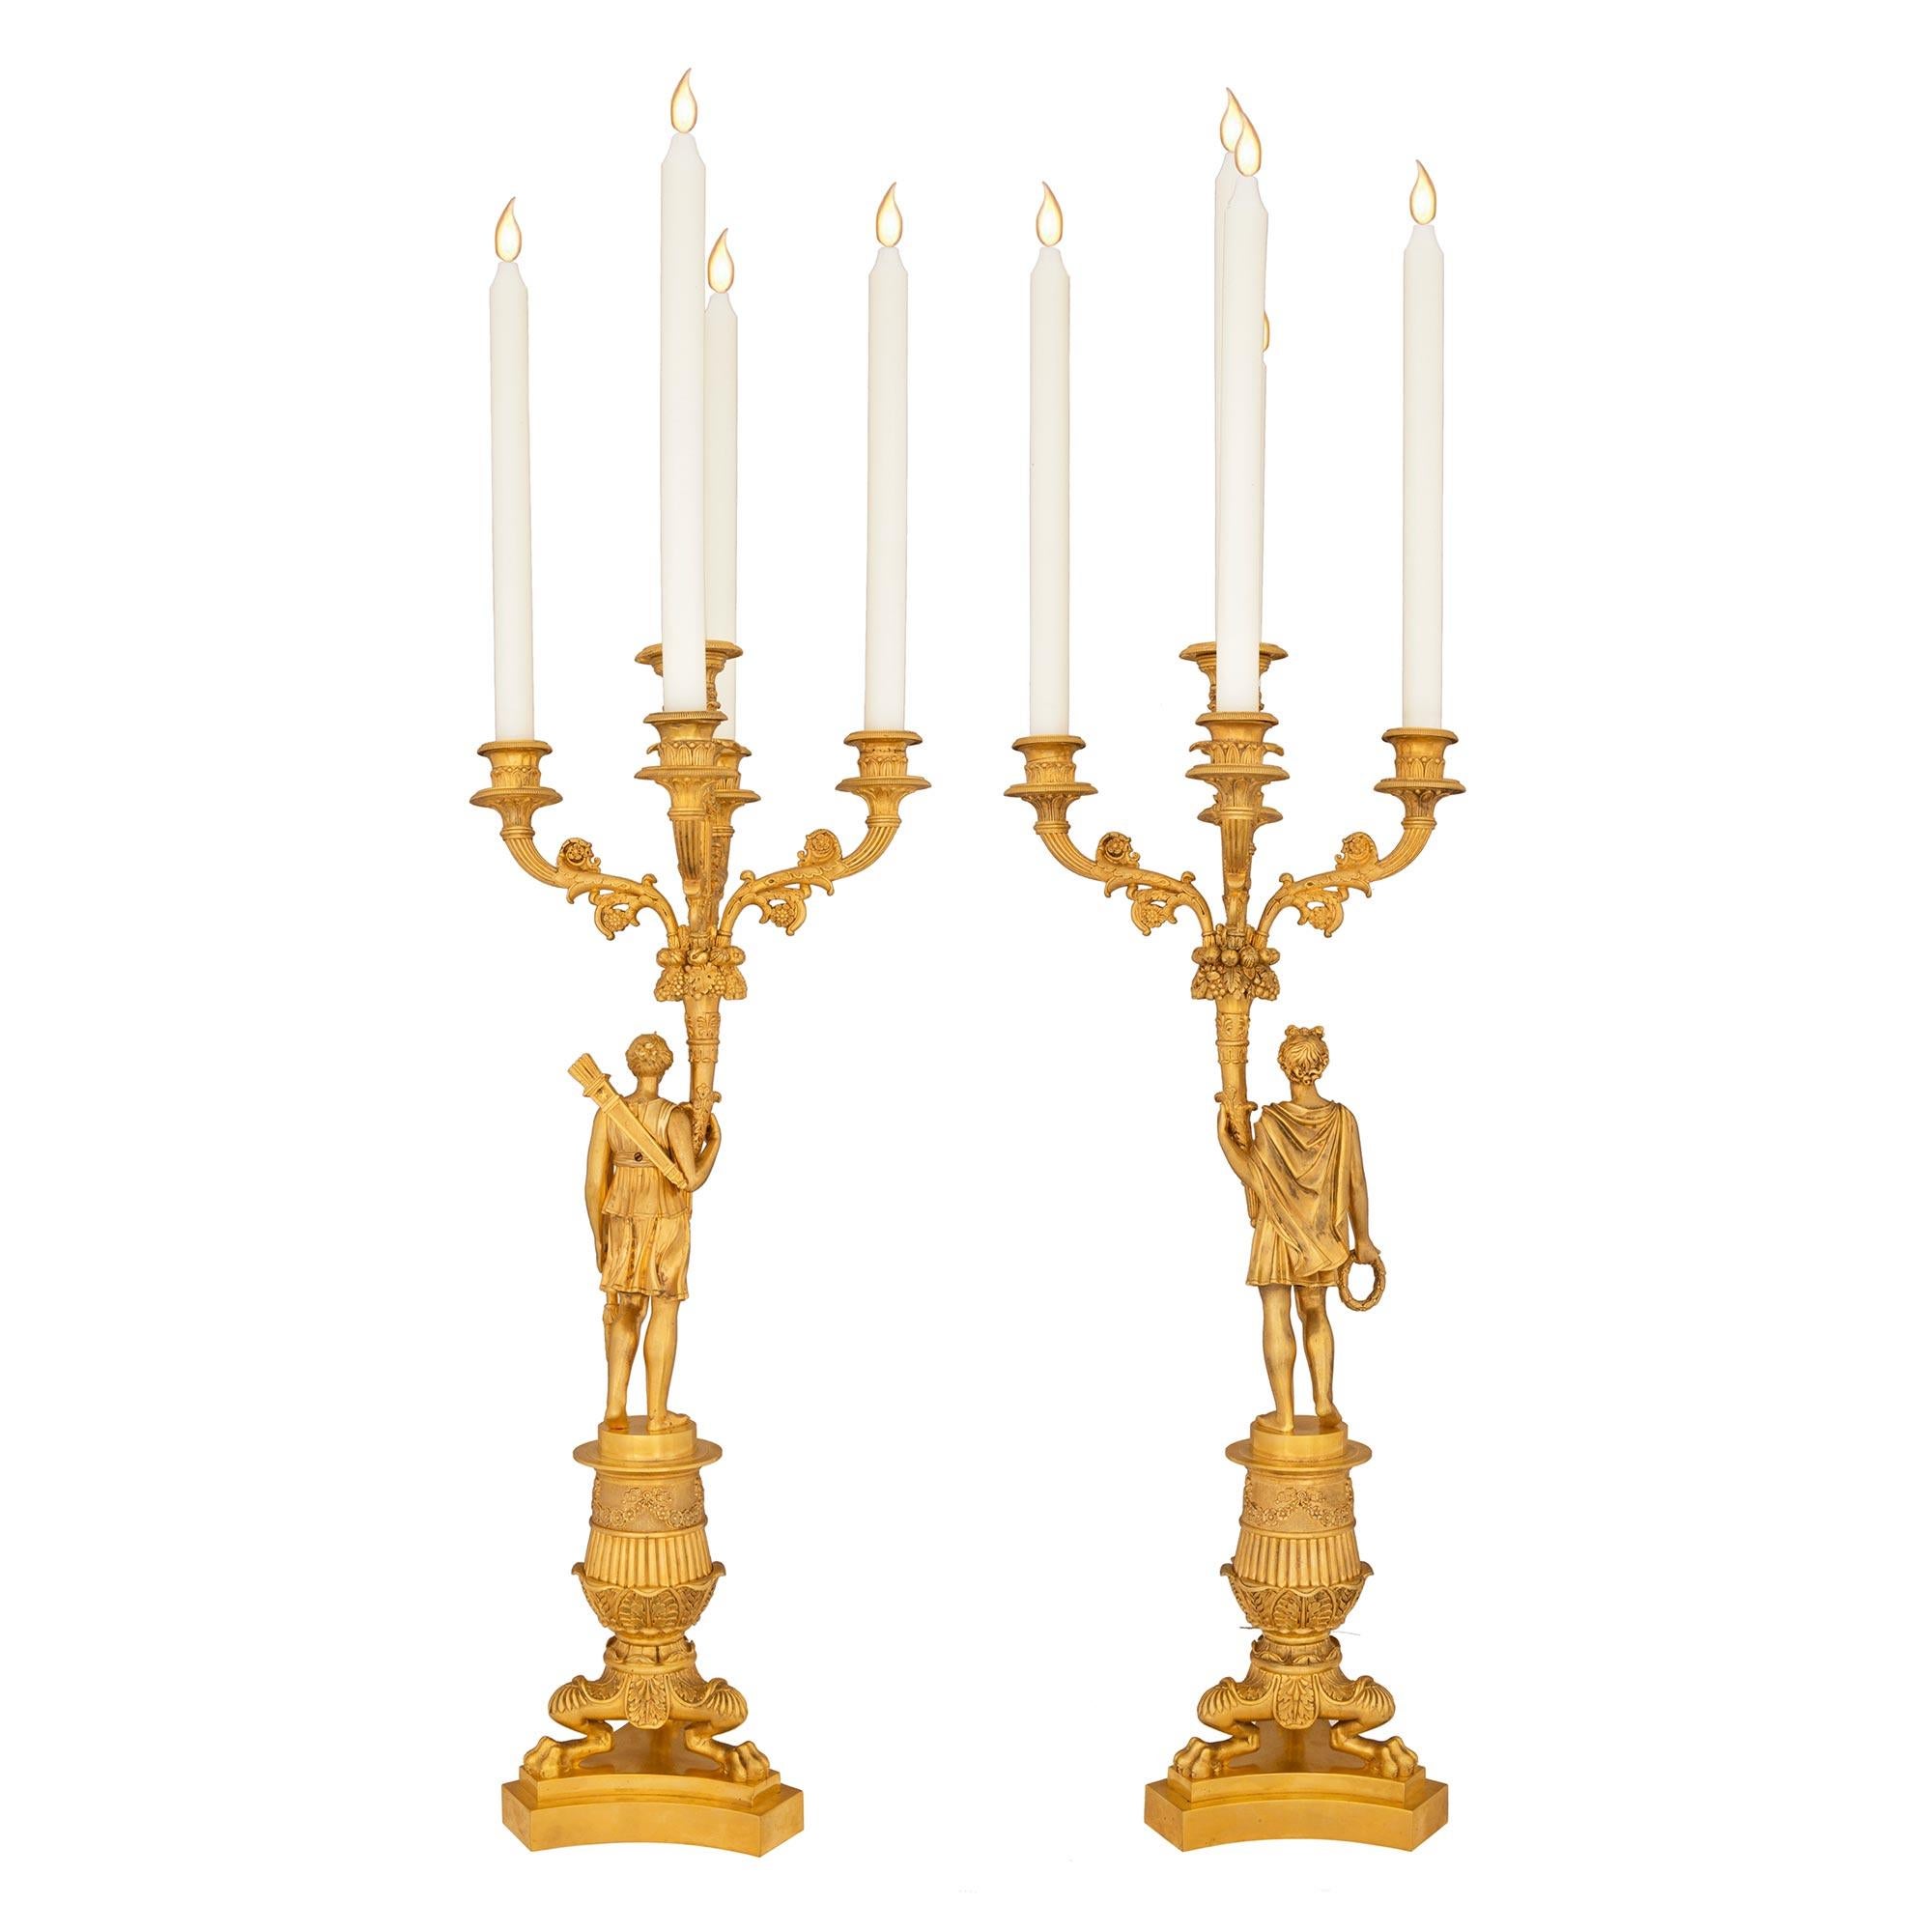 Pair of French Mid 19th Century Charles X Period Ormolu Candelabras In Good Condition For Sale In West Palm Beach, FL